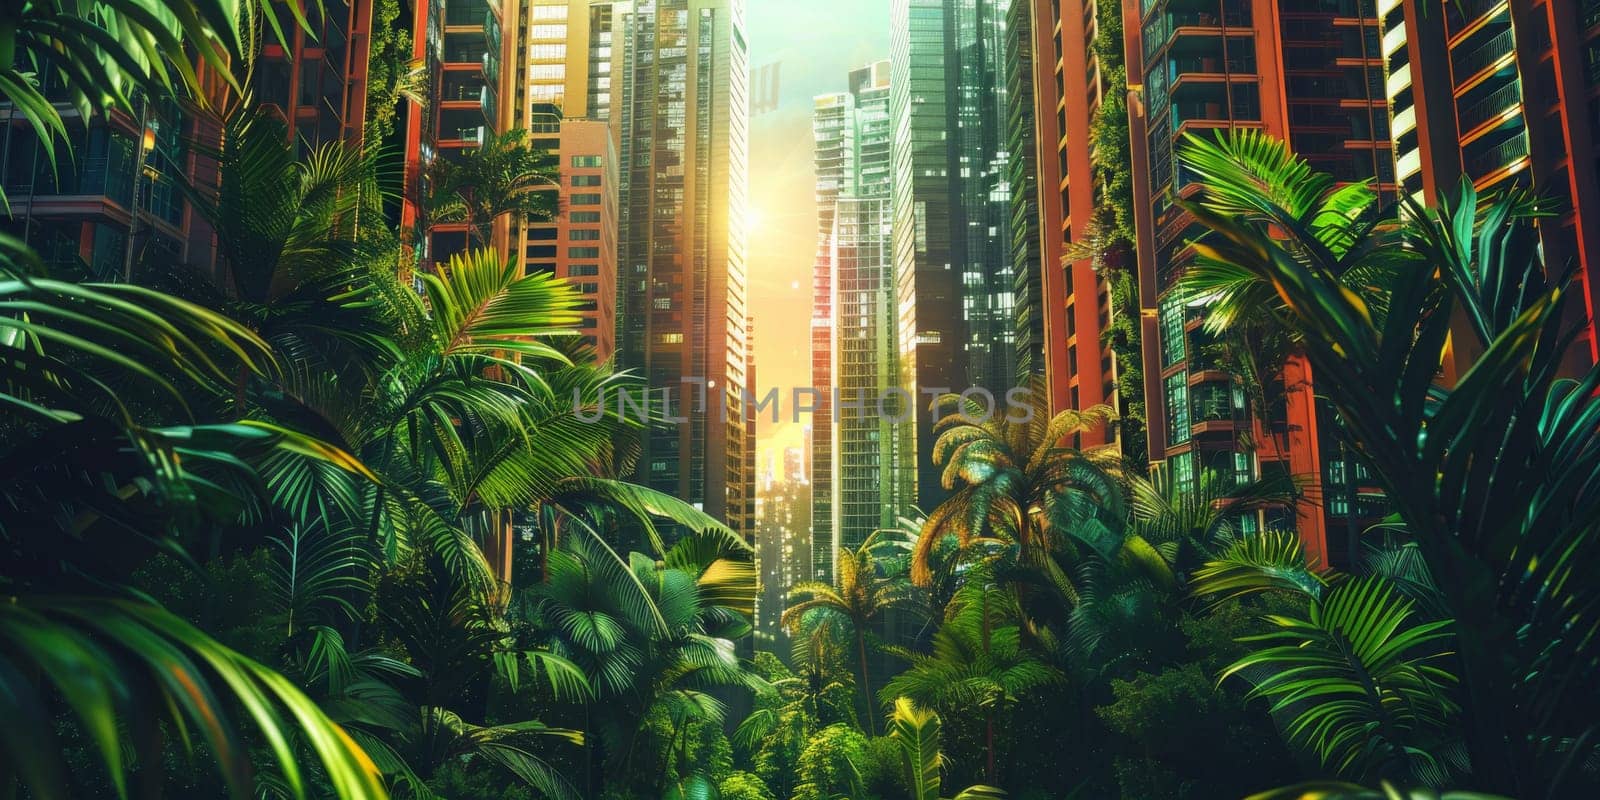 Nature and urban life with an image of a vibrant cityscape intertwined with lush vegetation by Kadula